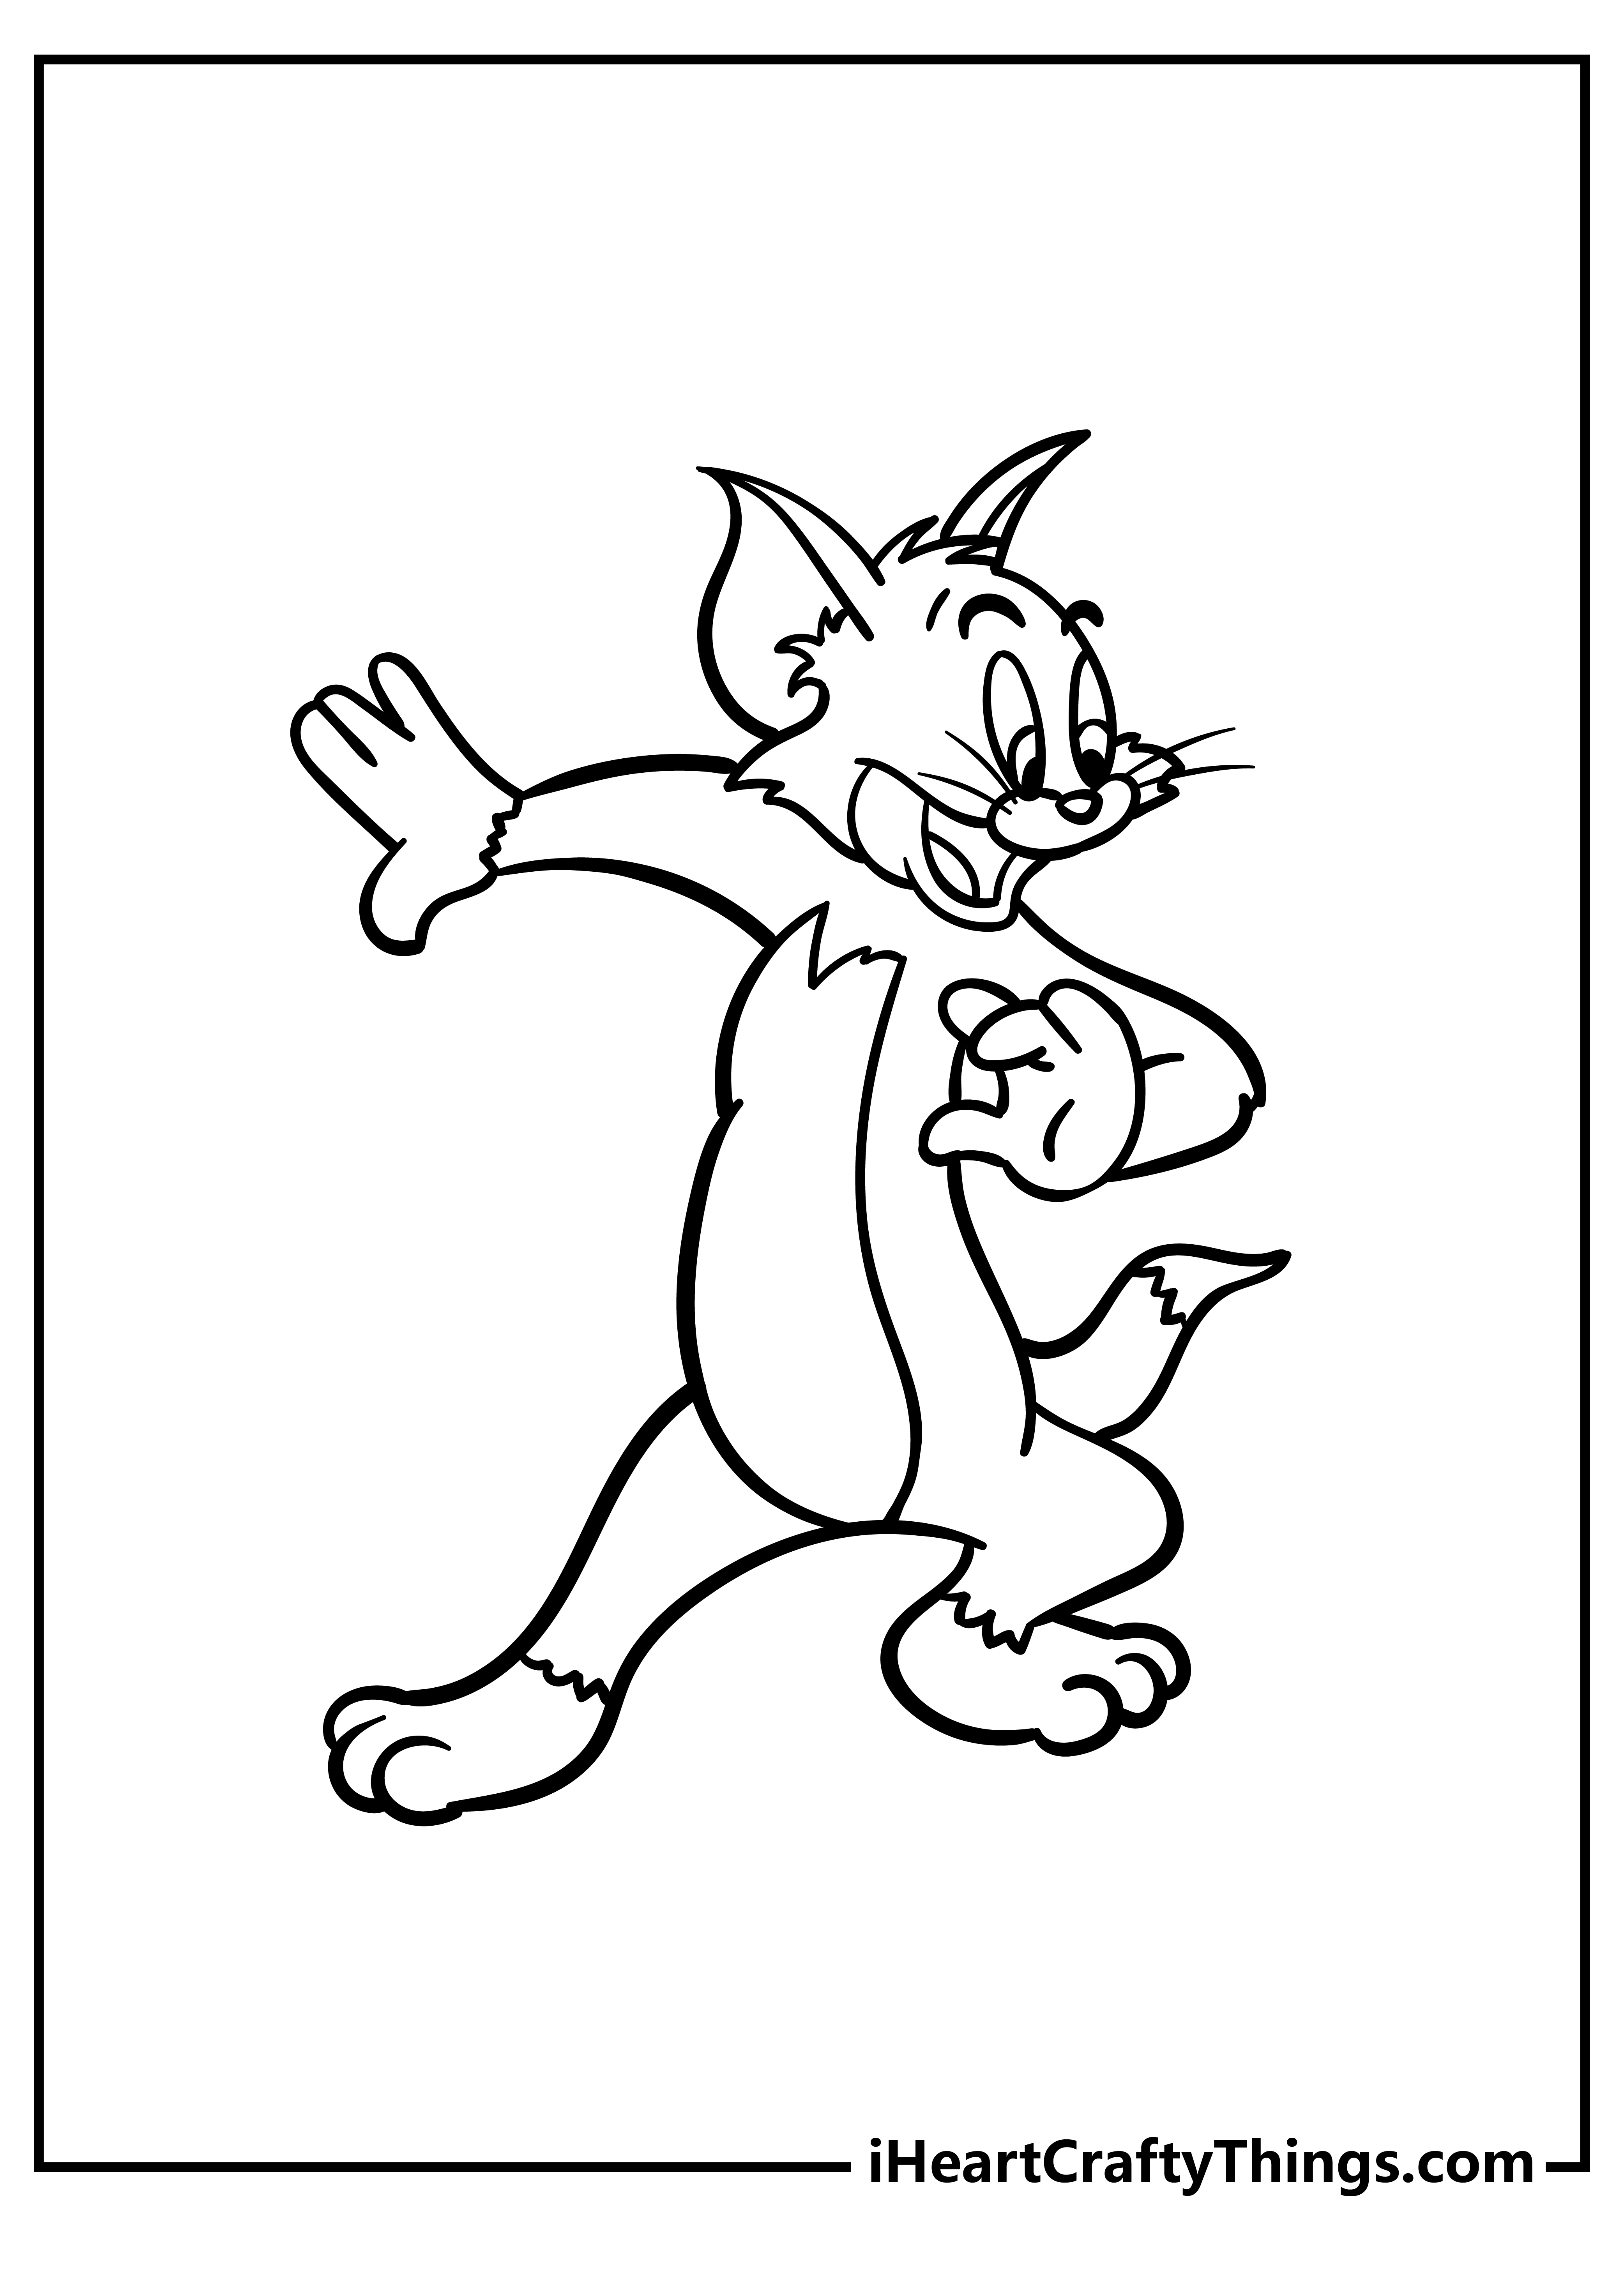 Tom and Jerry Coloring Pages free pdf download